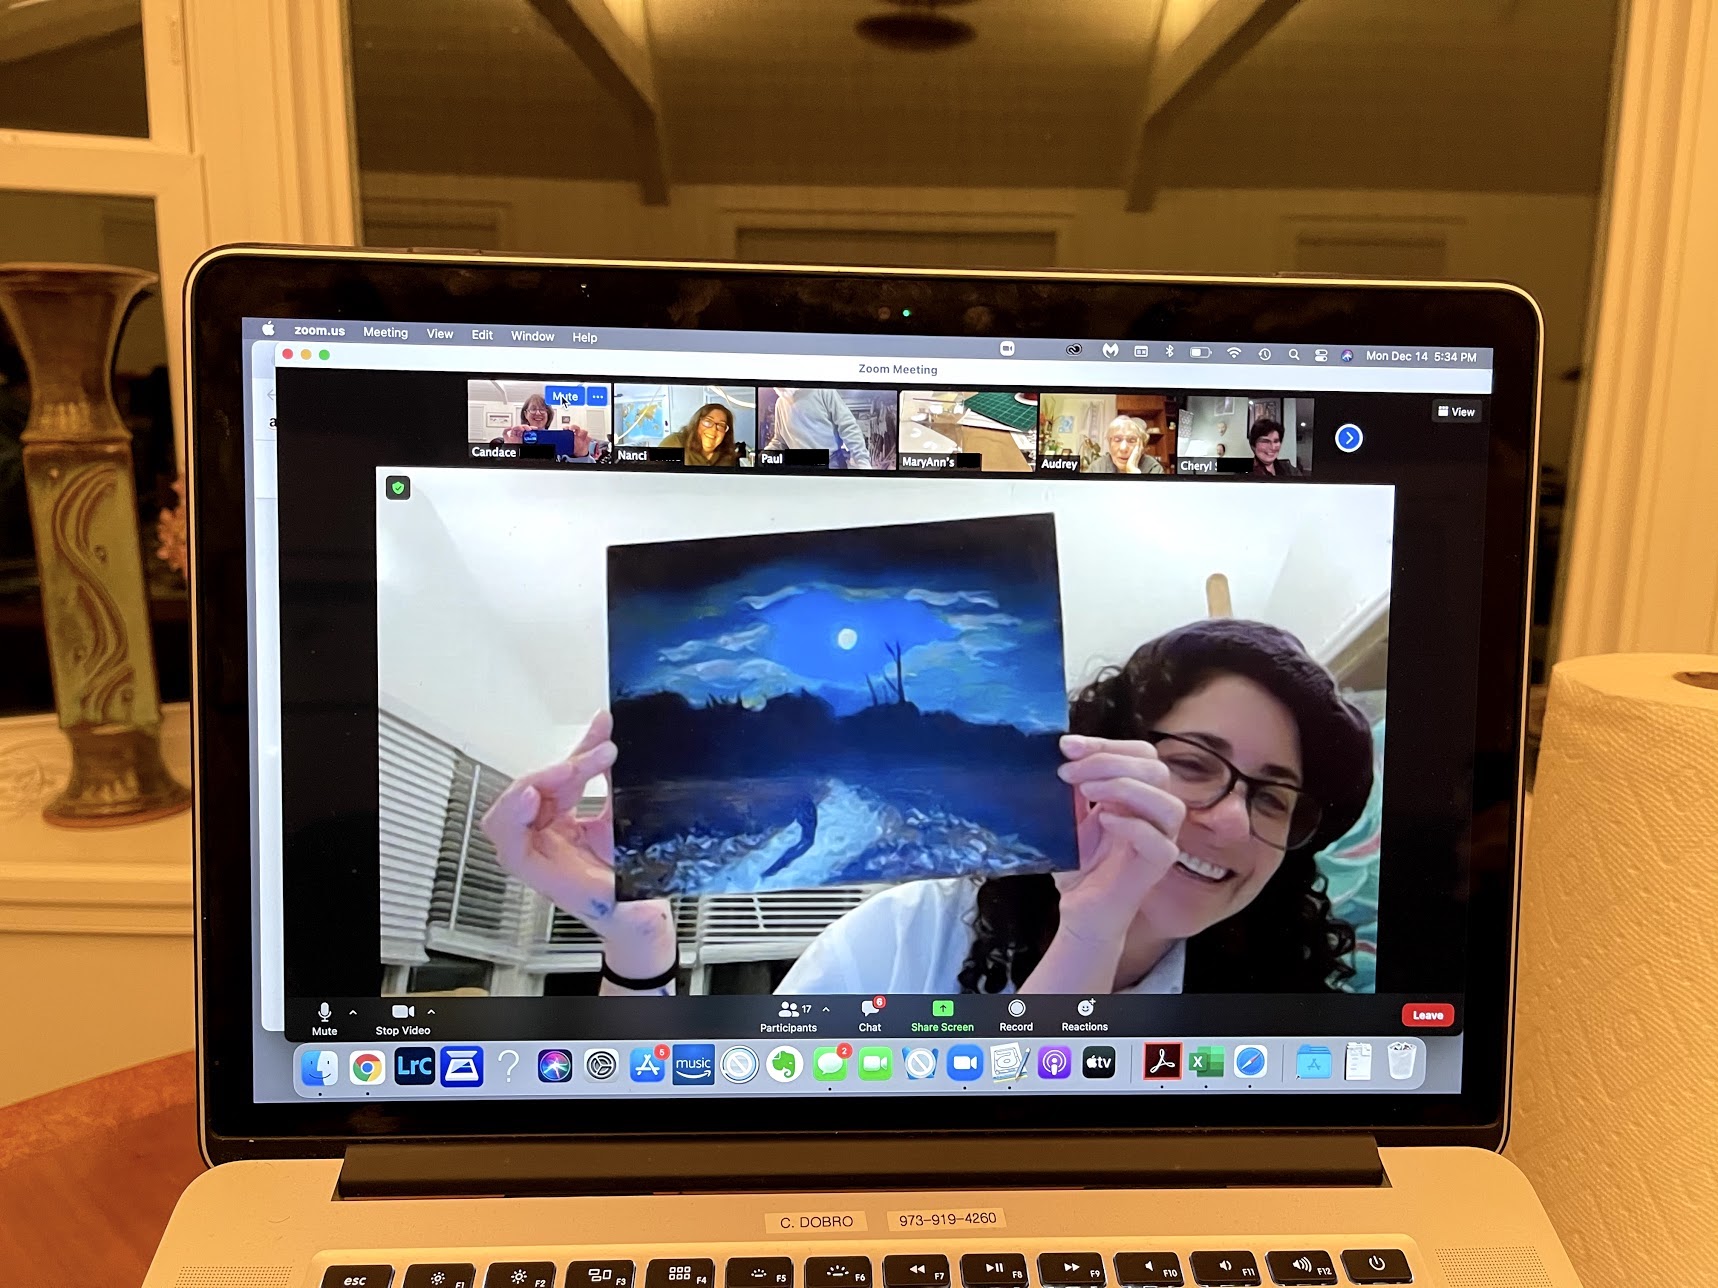 Noaa holding up a painting for Docents to see in a Zoom meeting.